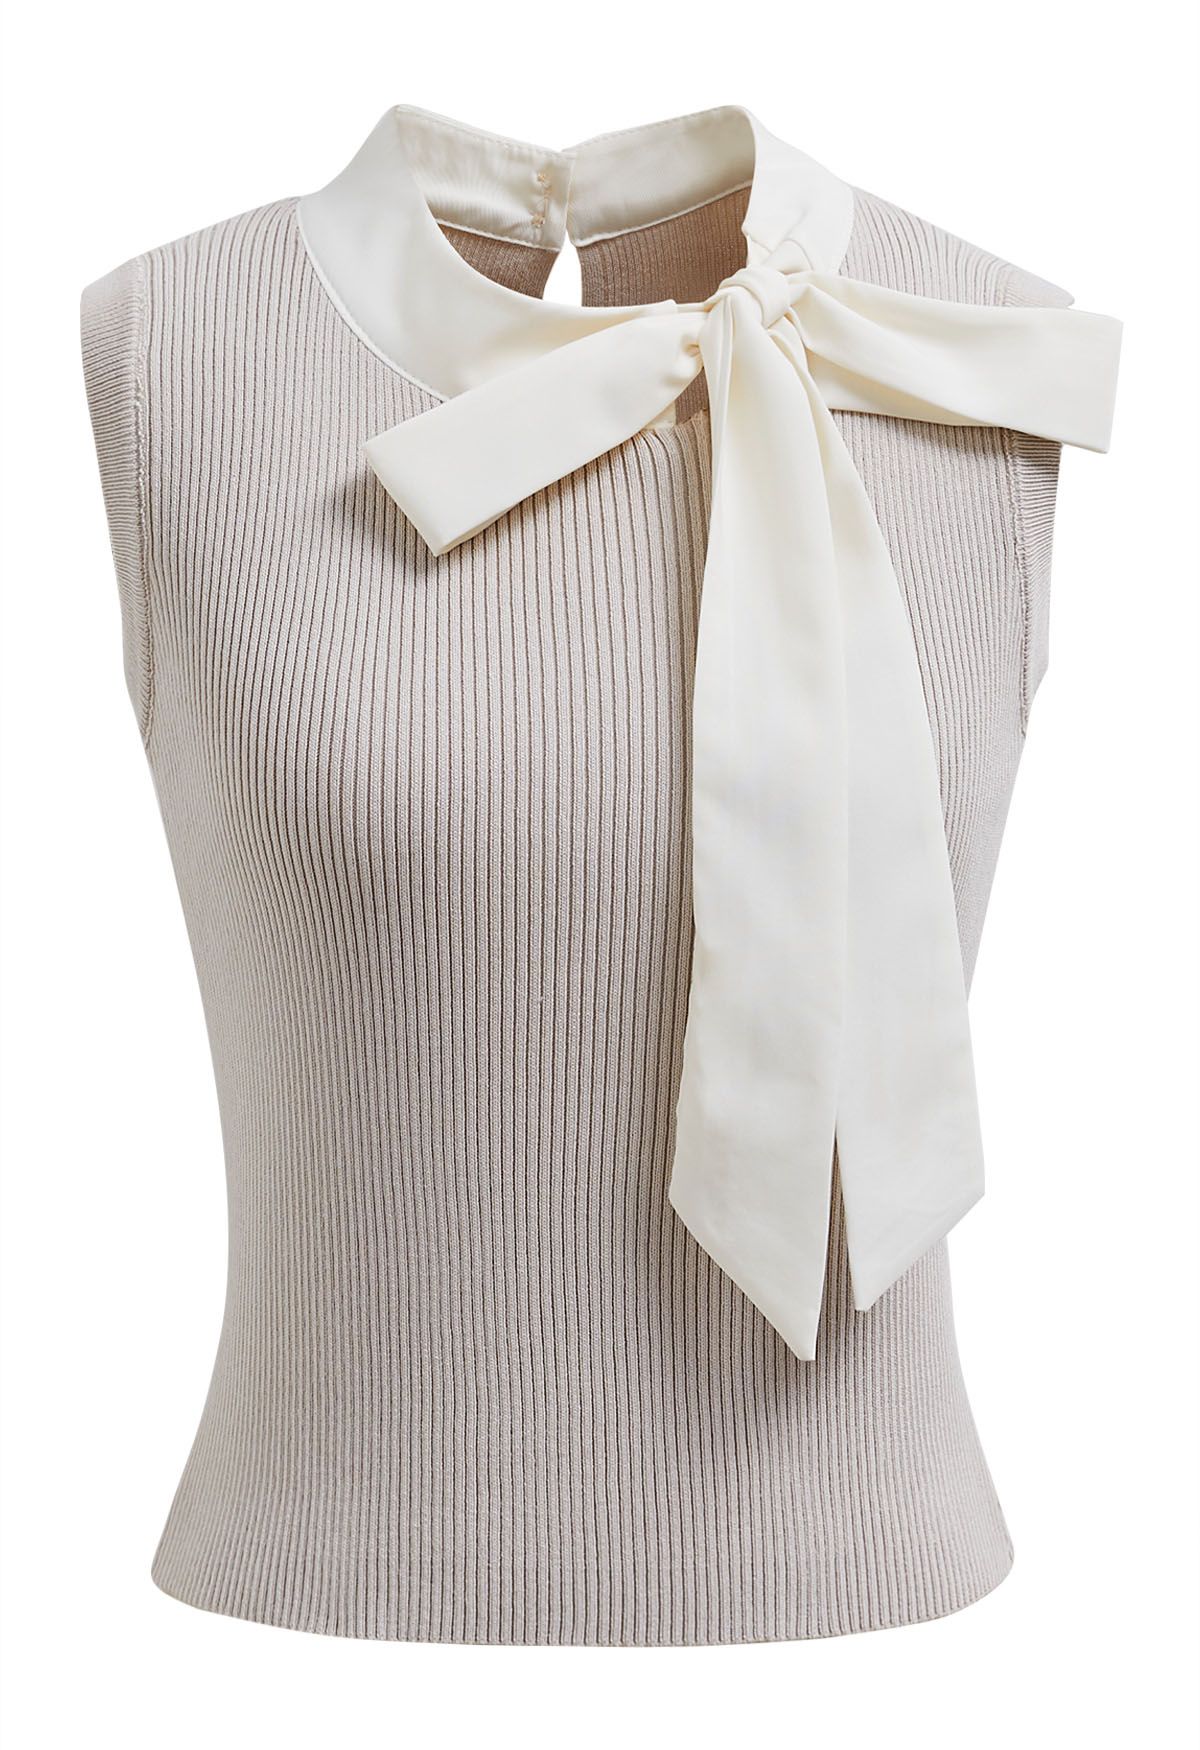 Bowknot Decor Sleeveless Knit Top in Oatmeal